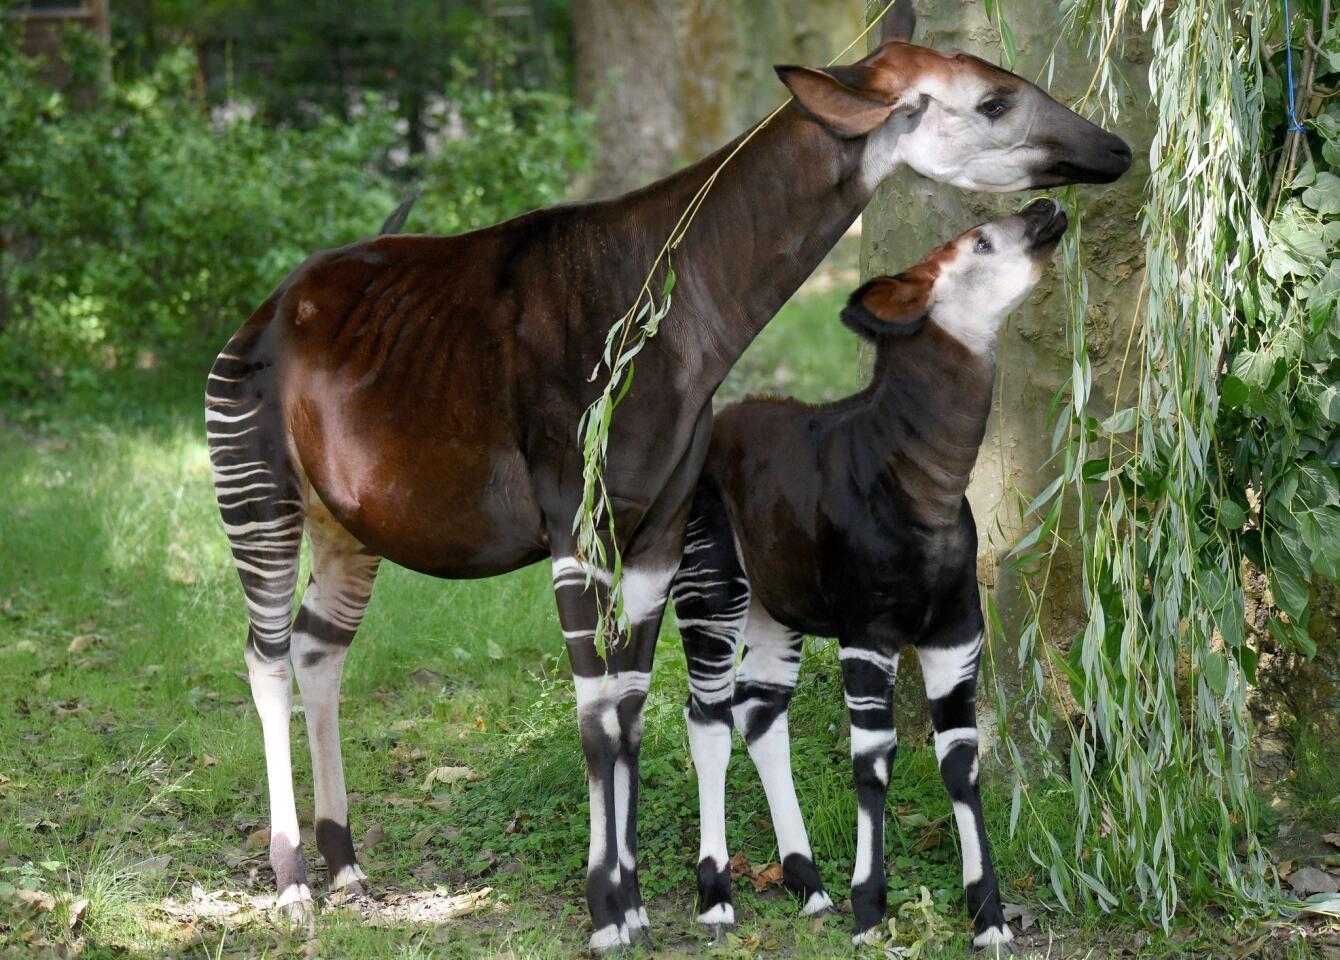 A newborn female okapi, Jamili, and her mother, Hakima, stand inside their enclosure at Cologne zoo in Cologne, Germany, on July 7, 2016. Jamili was born May 6.